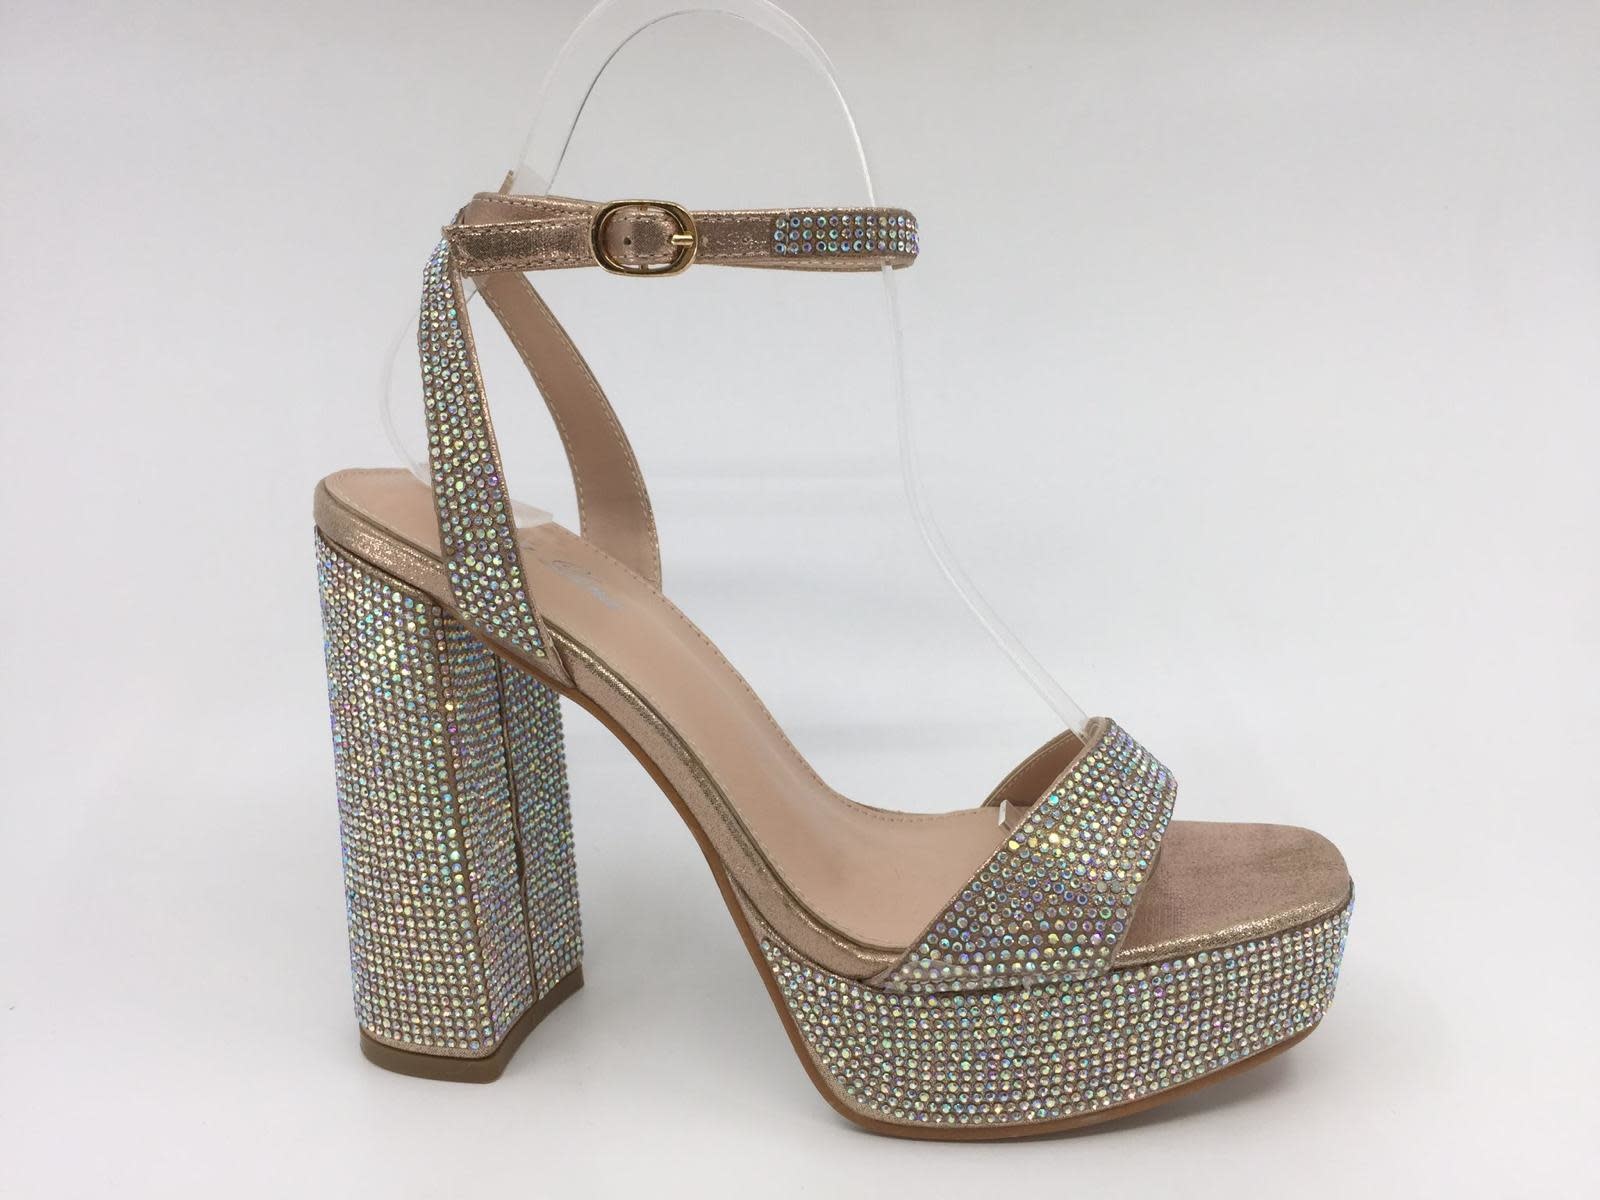 So excited to wear these gold glitter platform sandals out this weekend!  #platformsandalsheels | Glitter shoes, Heels, Prom shoes